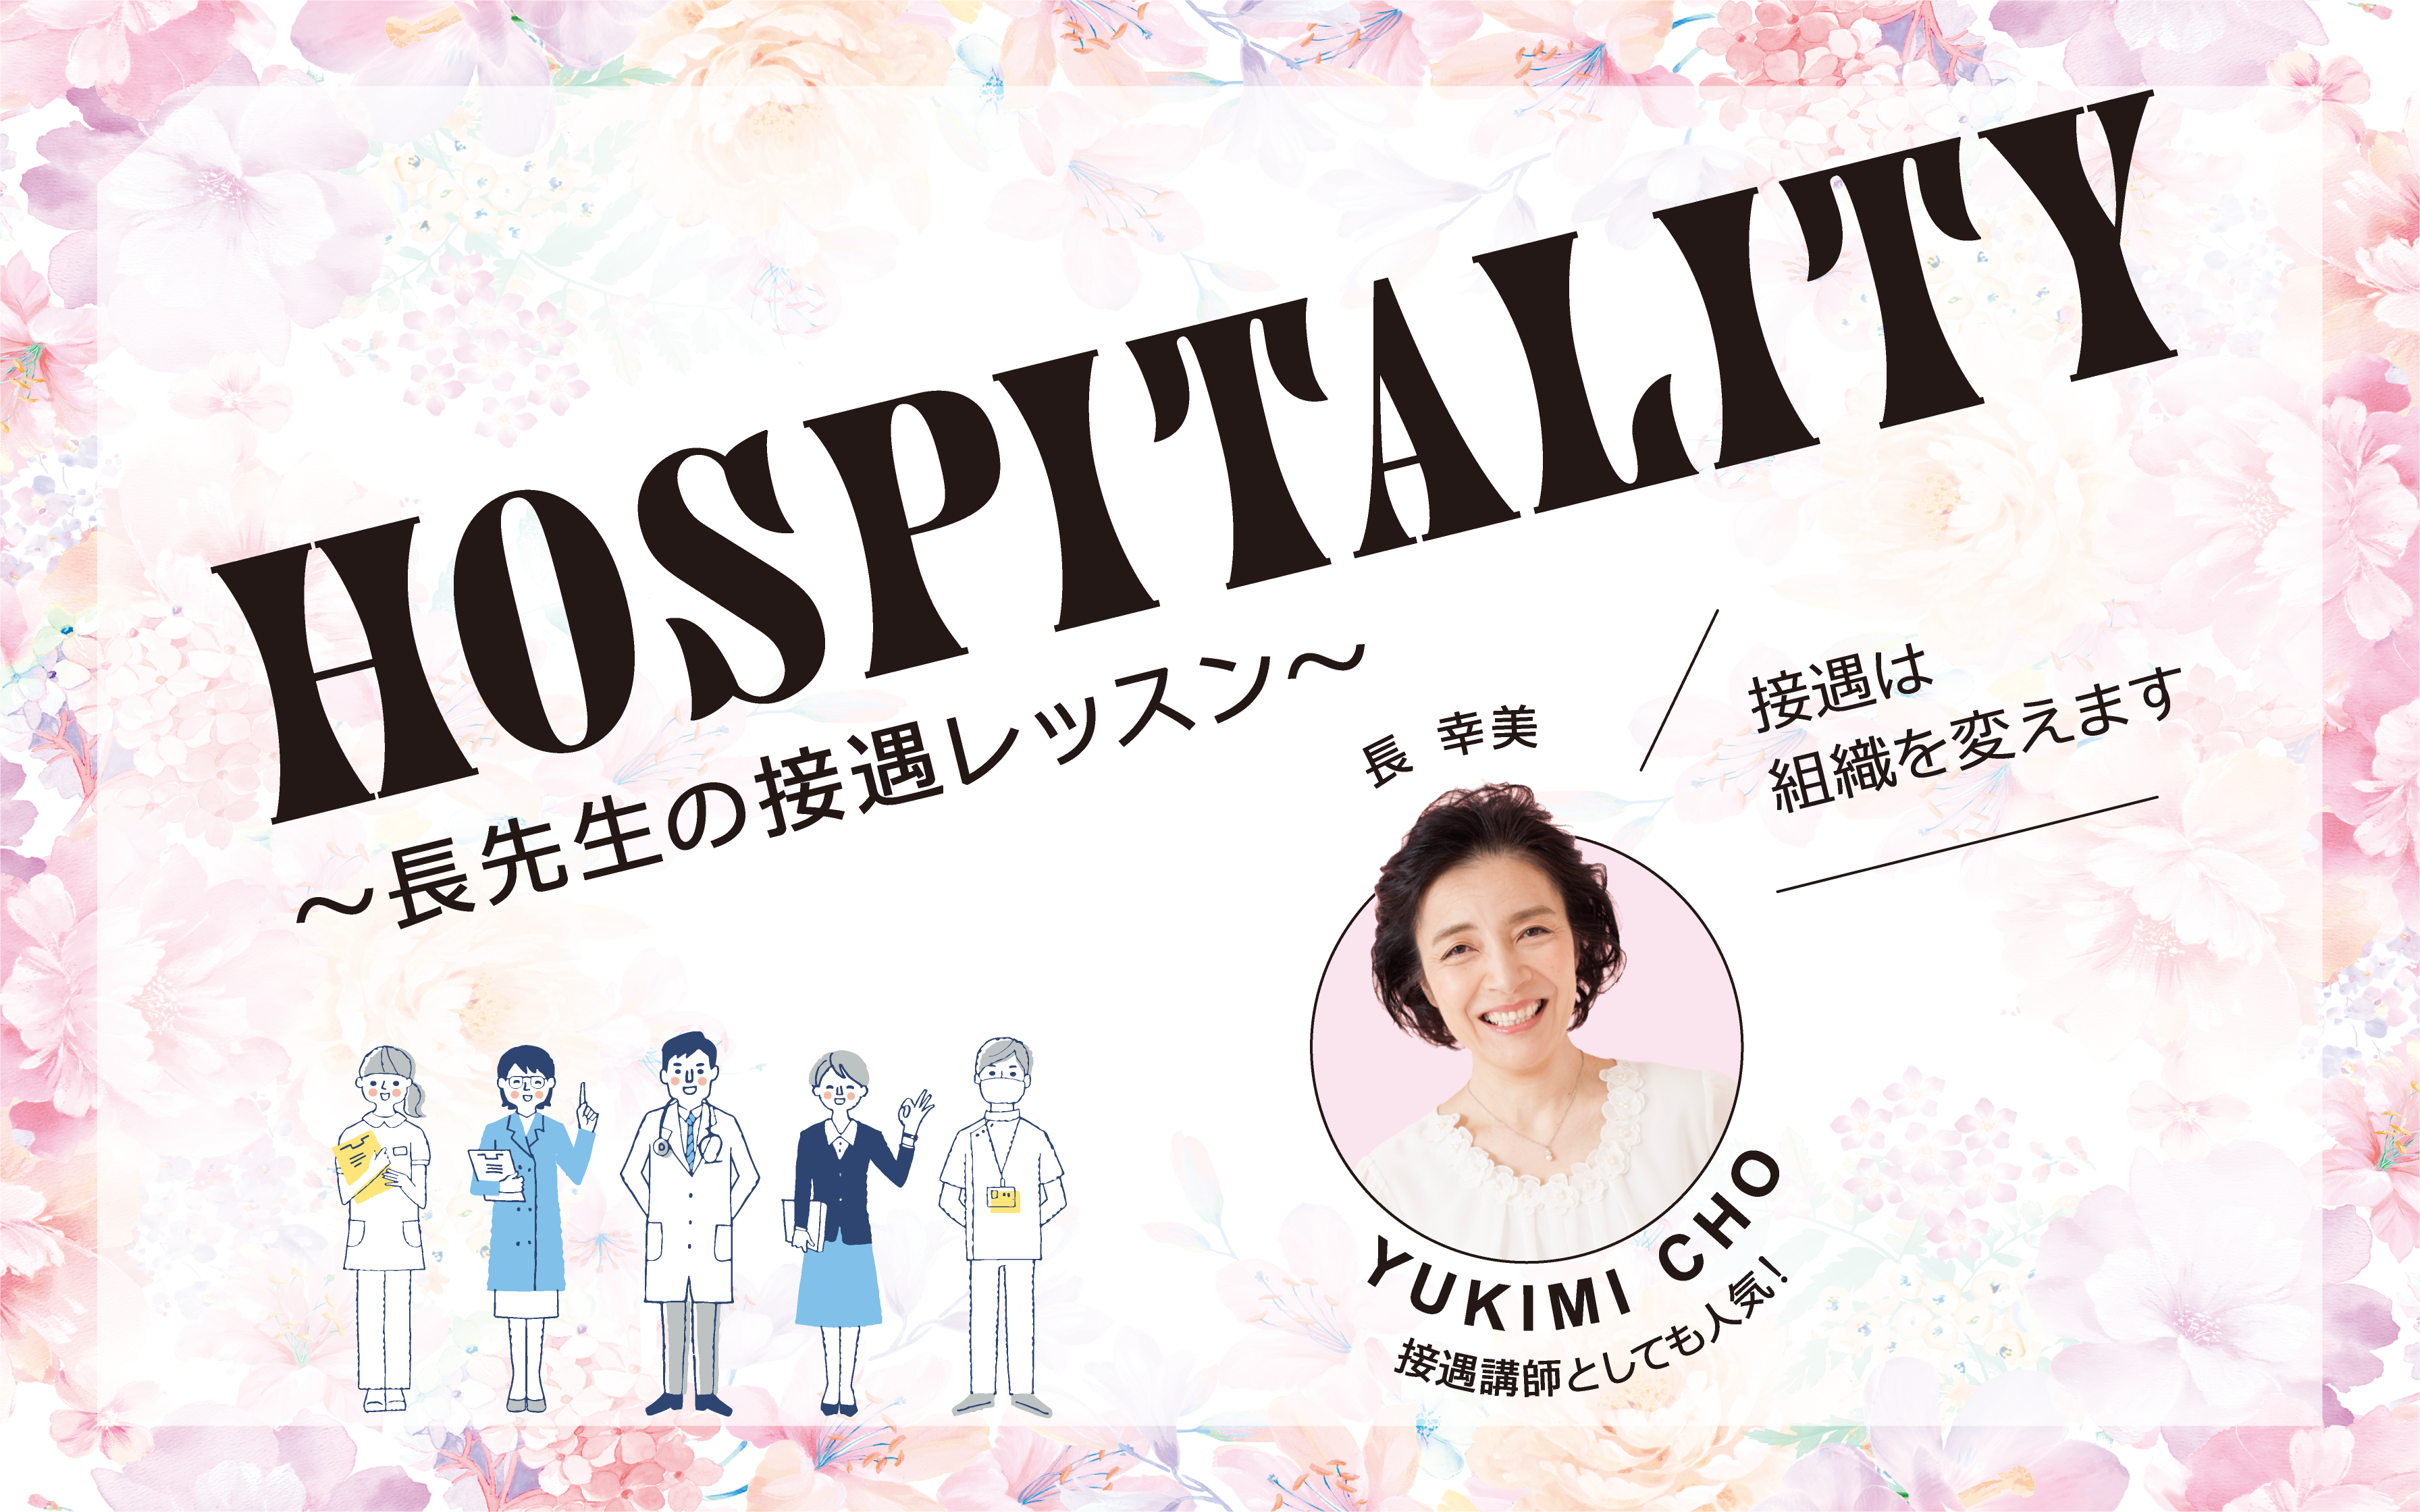 You are currently viewing HOSPITALITY 〜長先生の接遇レッスン〜 VOL.33　誠実な人とは…？